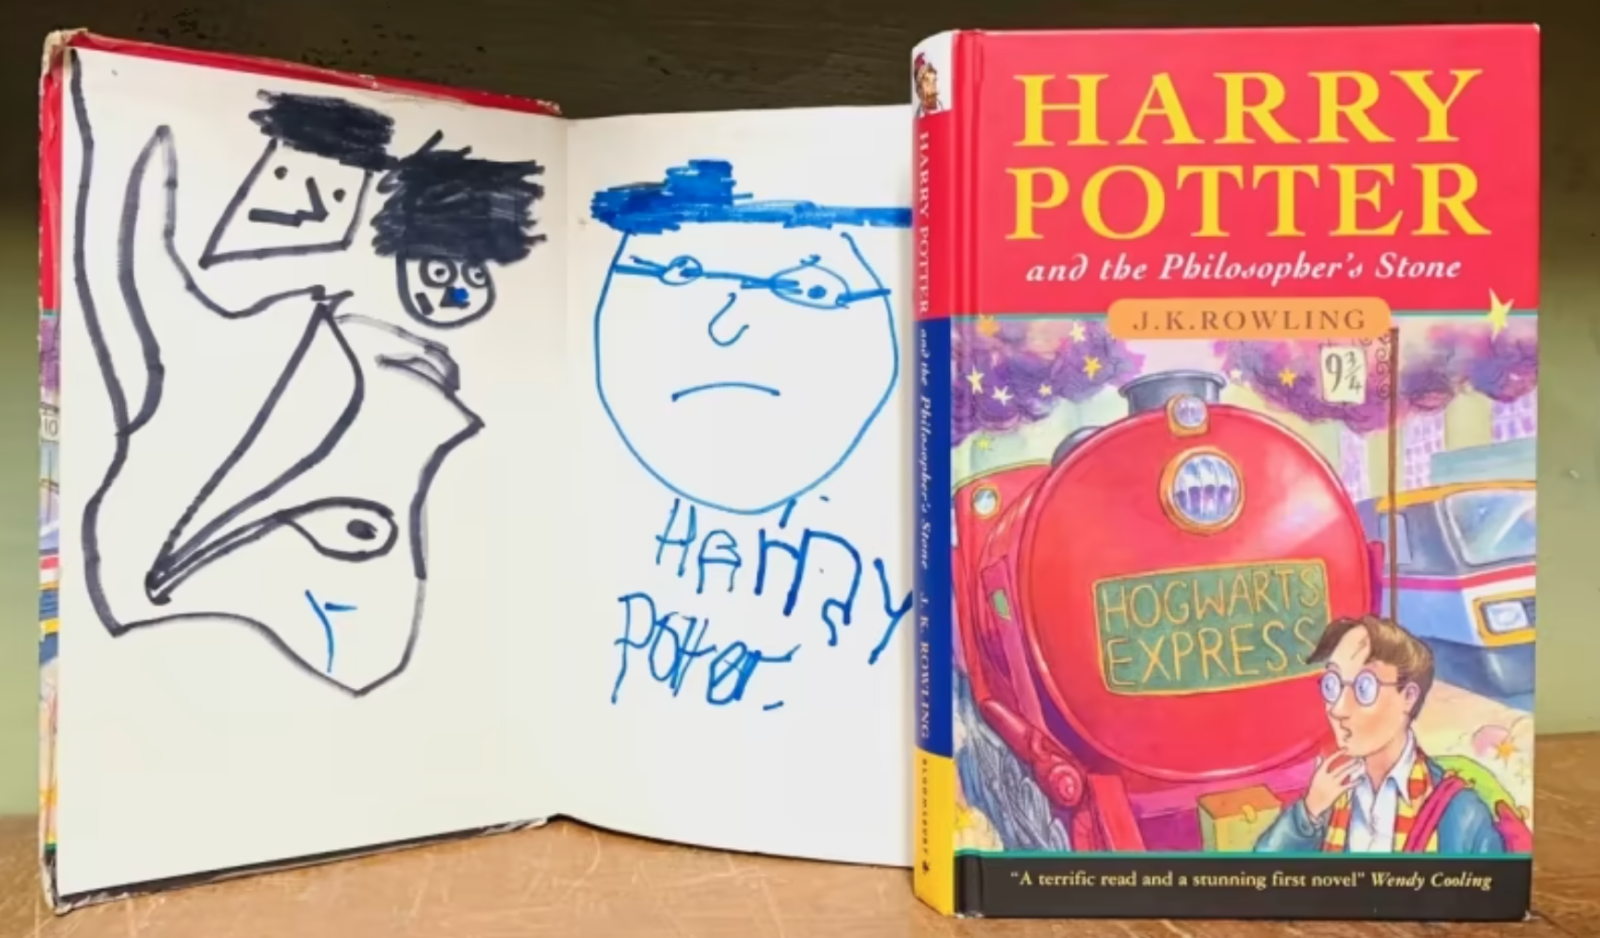 Original Harry Potter book bought for 50p at Manchester charity shop set to sell for £3k, The Manc